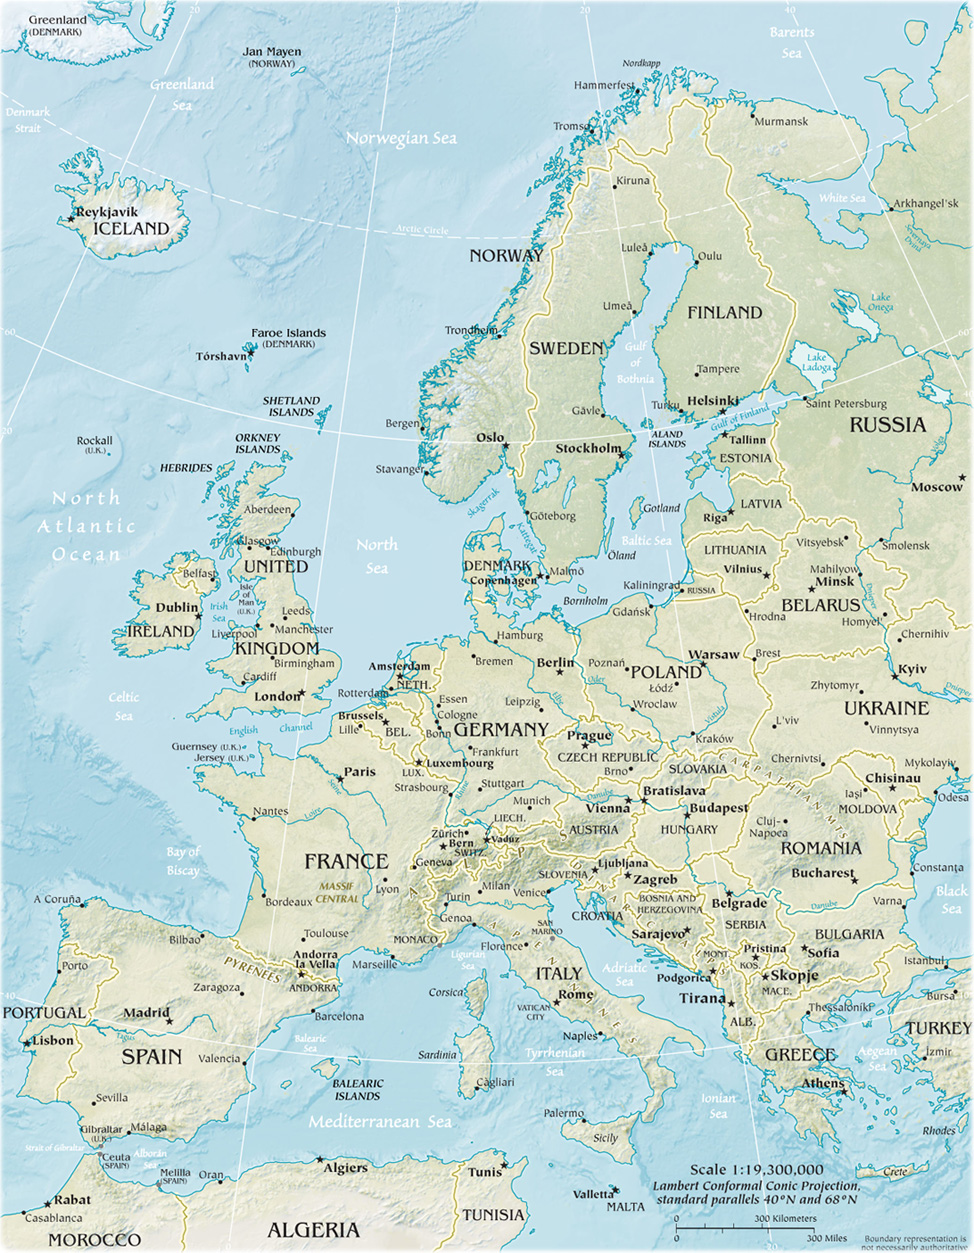 Physical Map of Europe